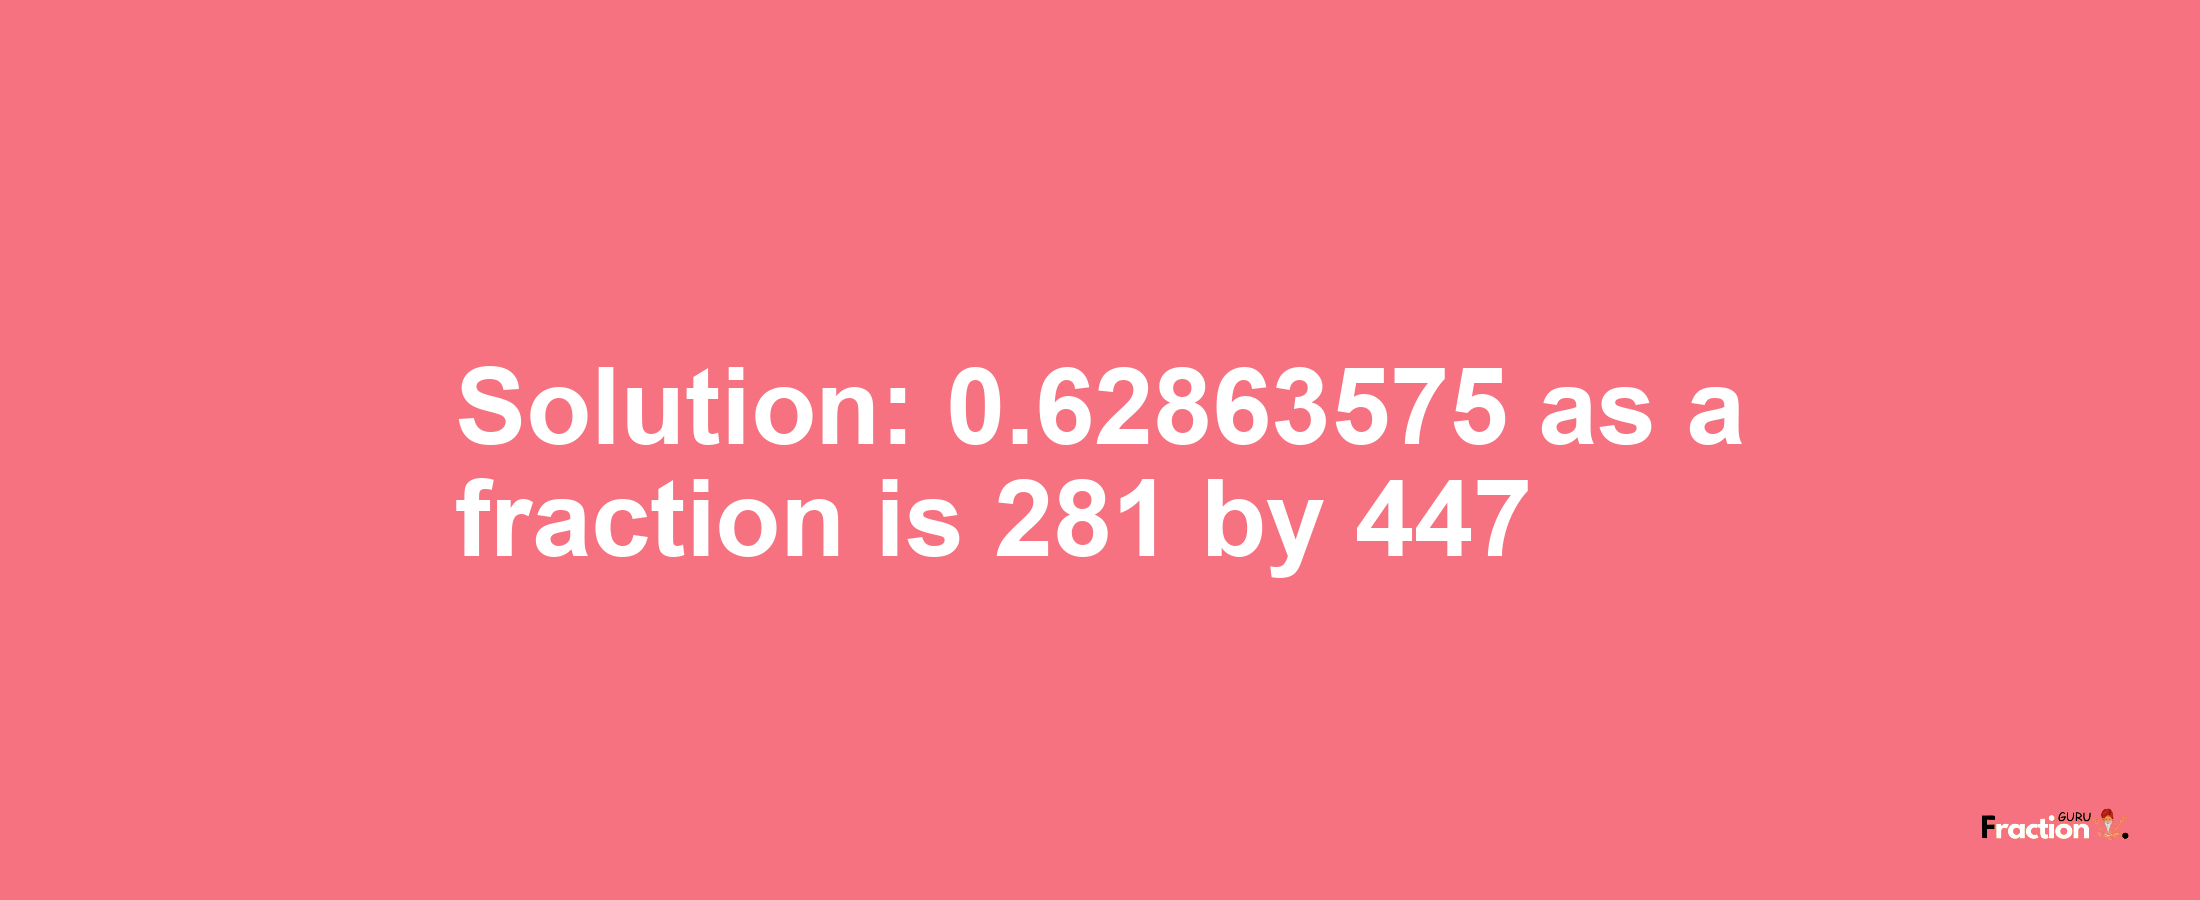 Solution:0.62863575 as a fraction is 281/447